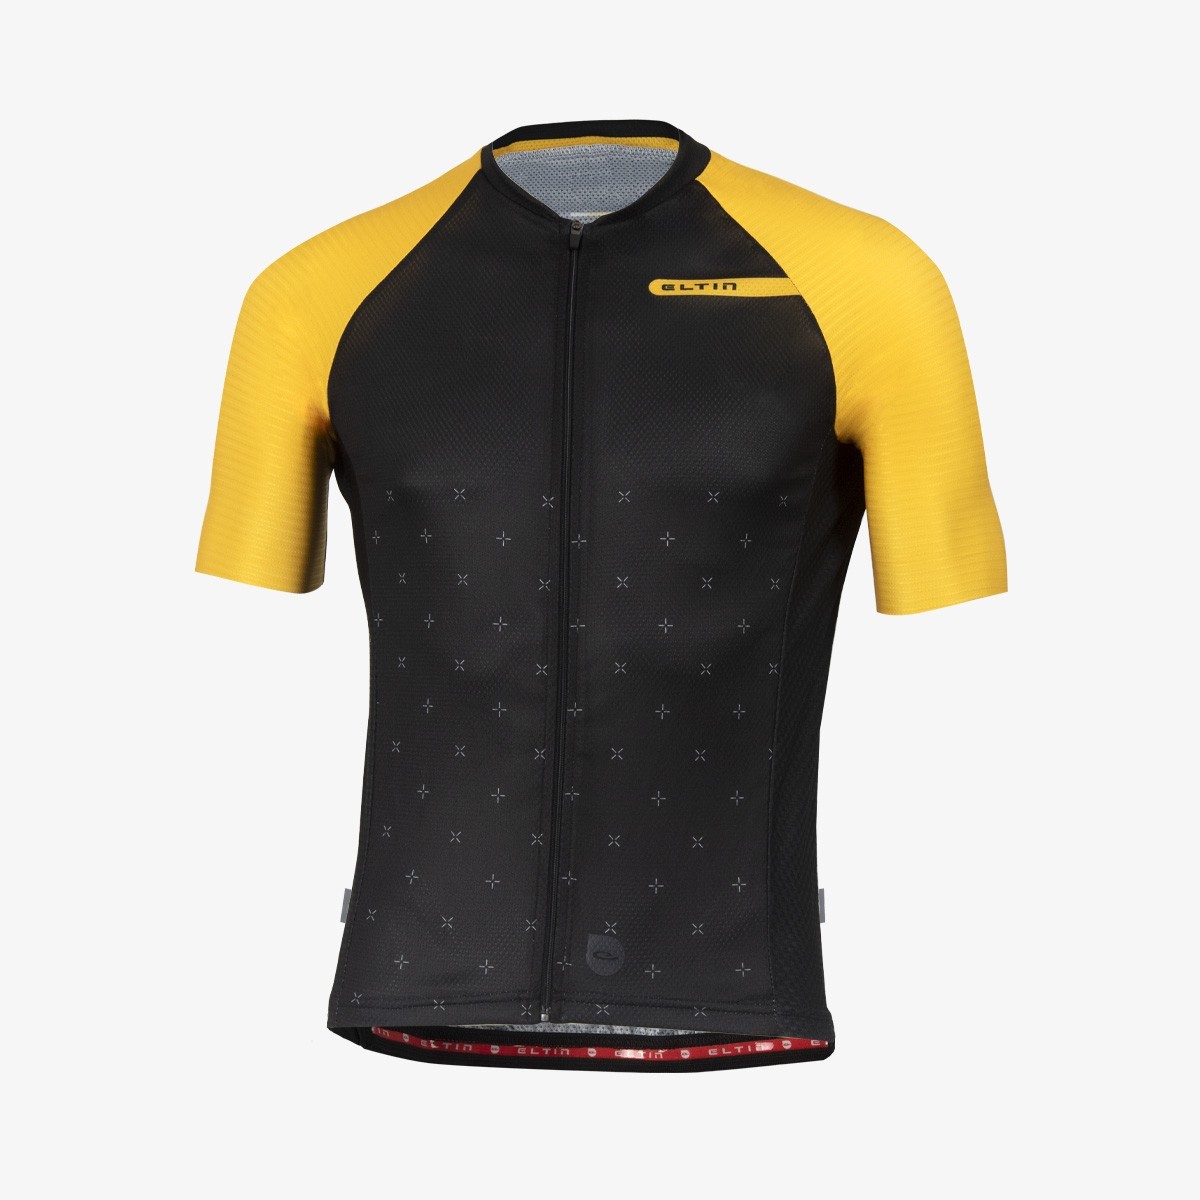 Maillot ciclismo Resistance y